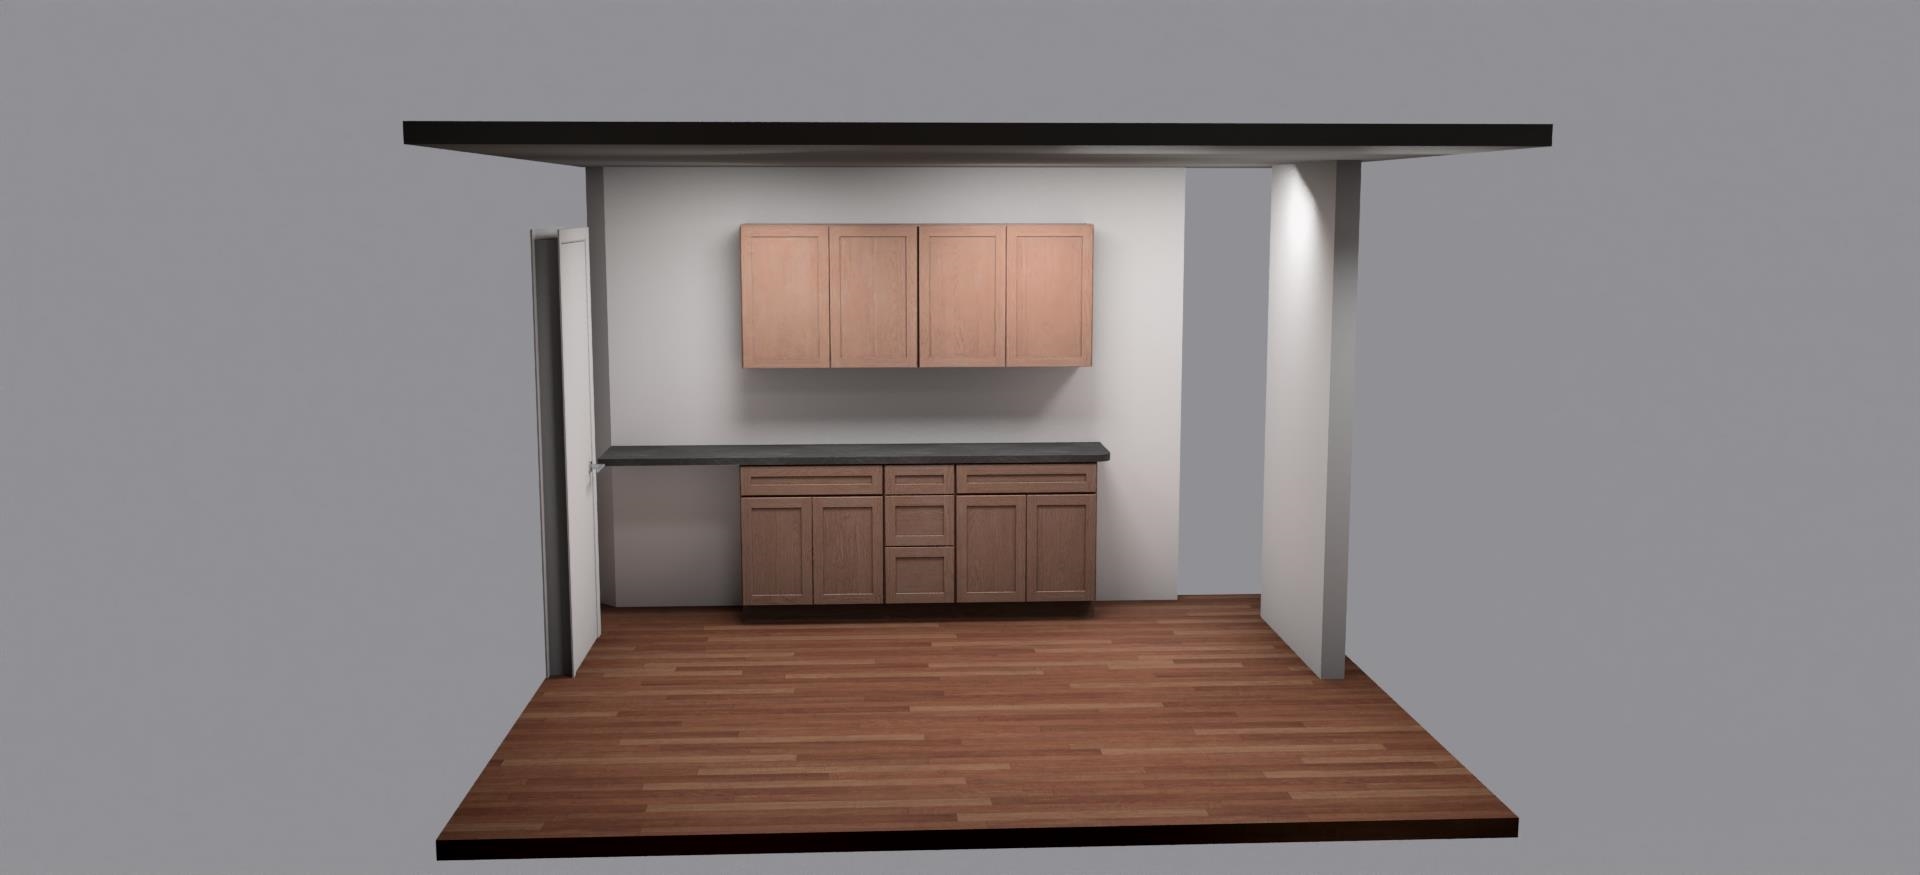 Image of Back Wall of Kitchen Cabinets